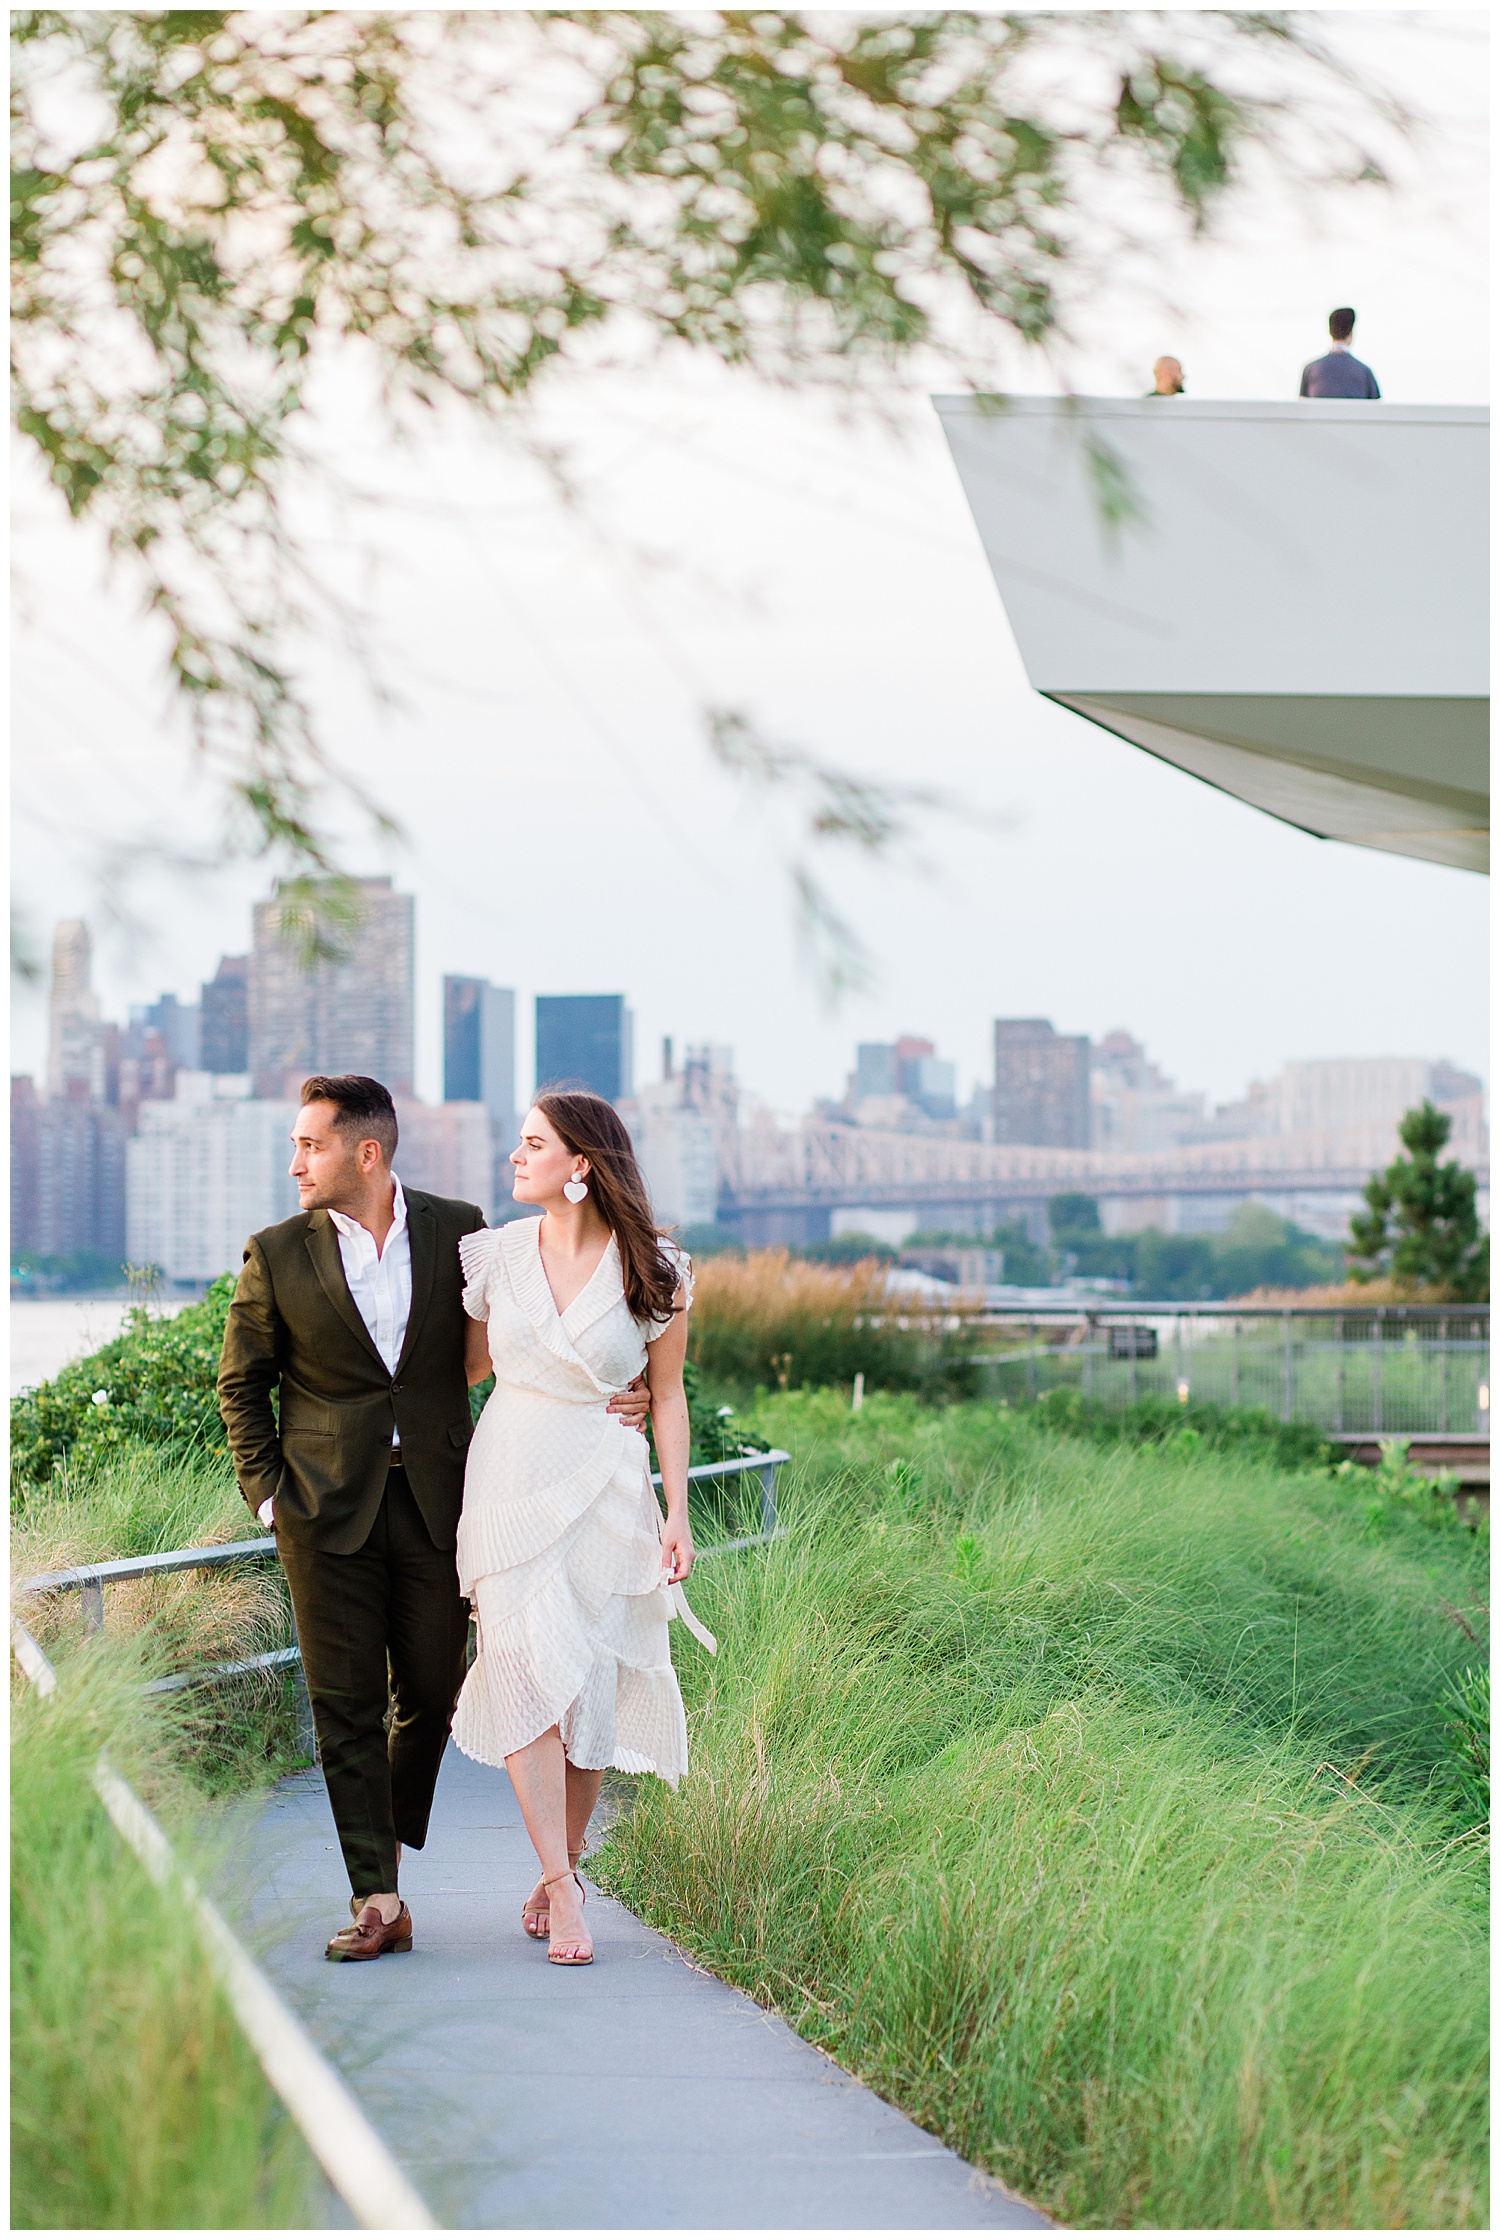 Couple walk along park path in front of city skyline